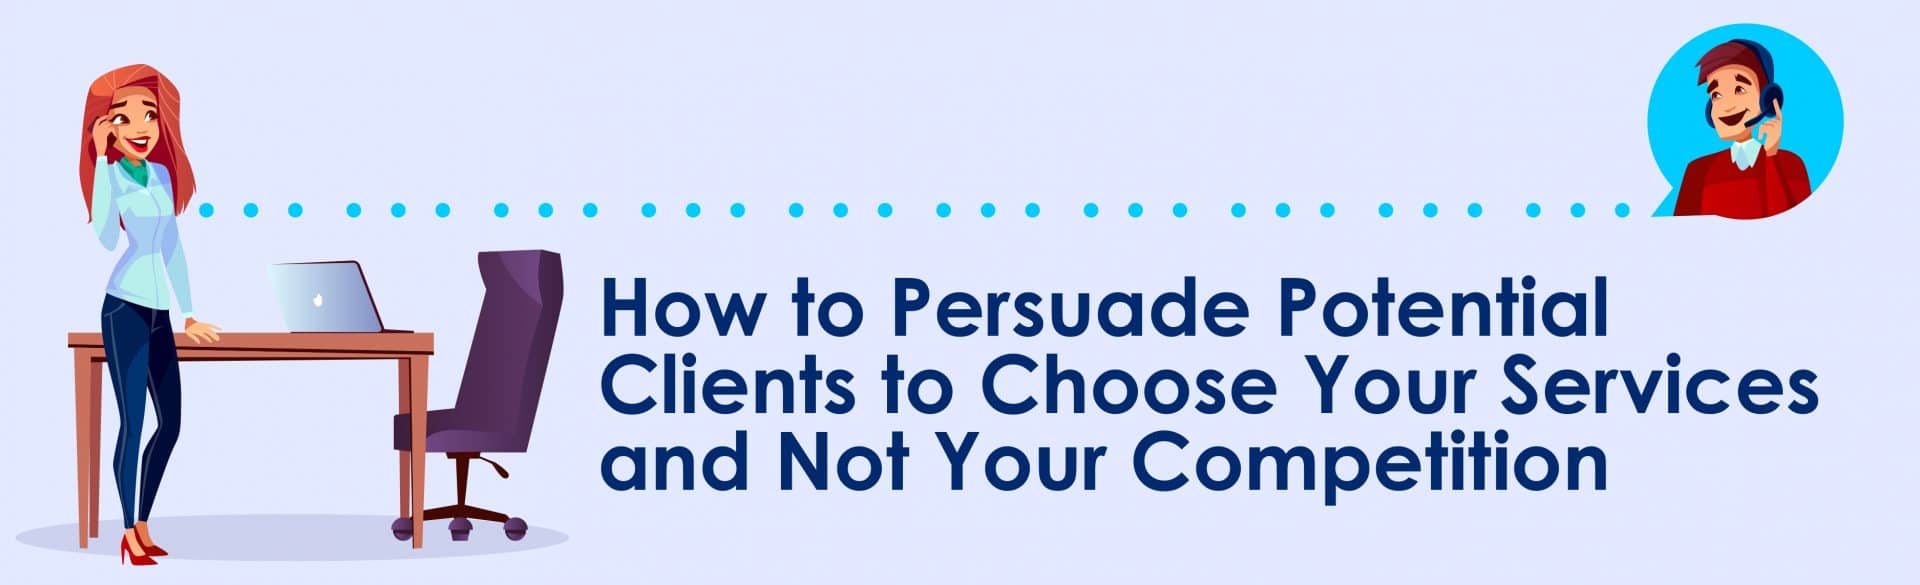 How to Persuade Potential Clients to Choose Your Services and Not Your Competition